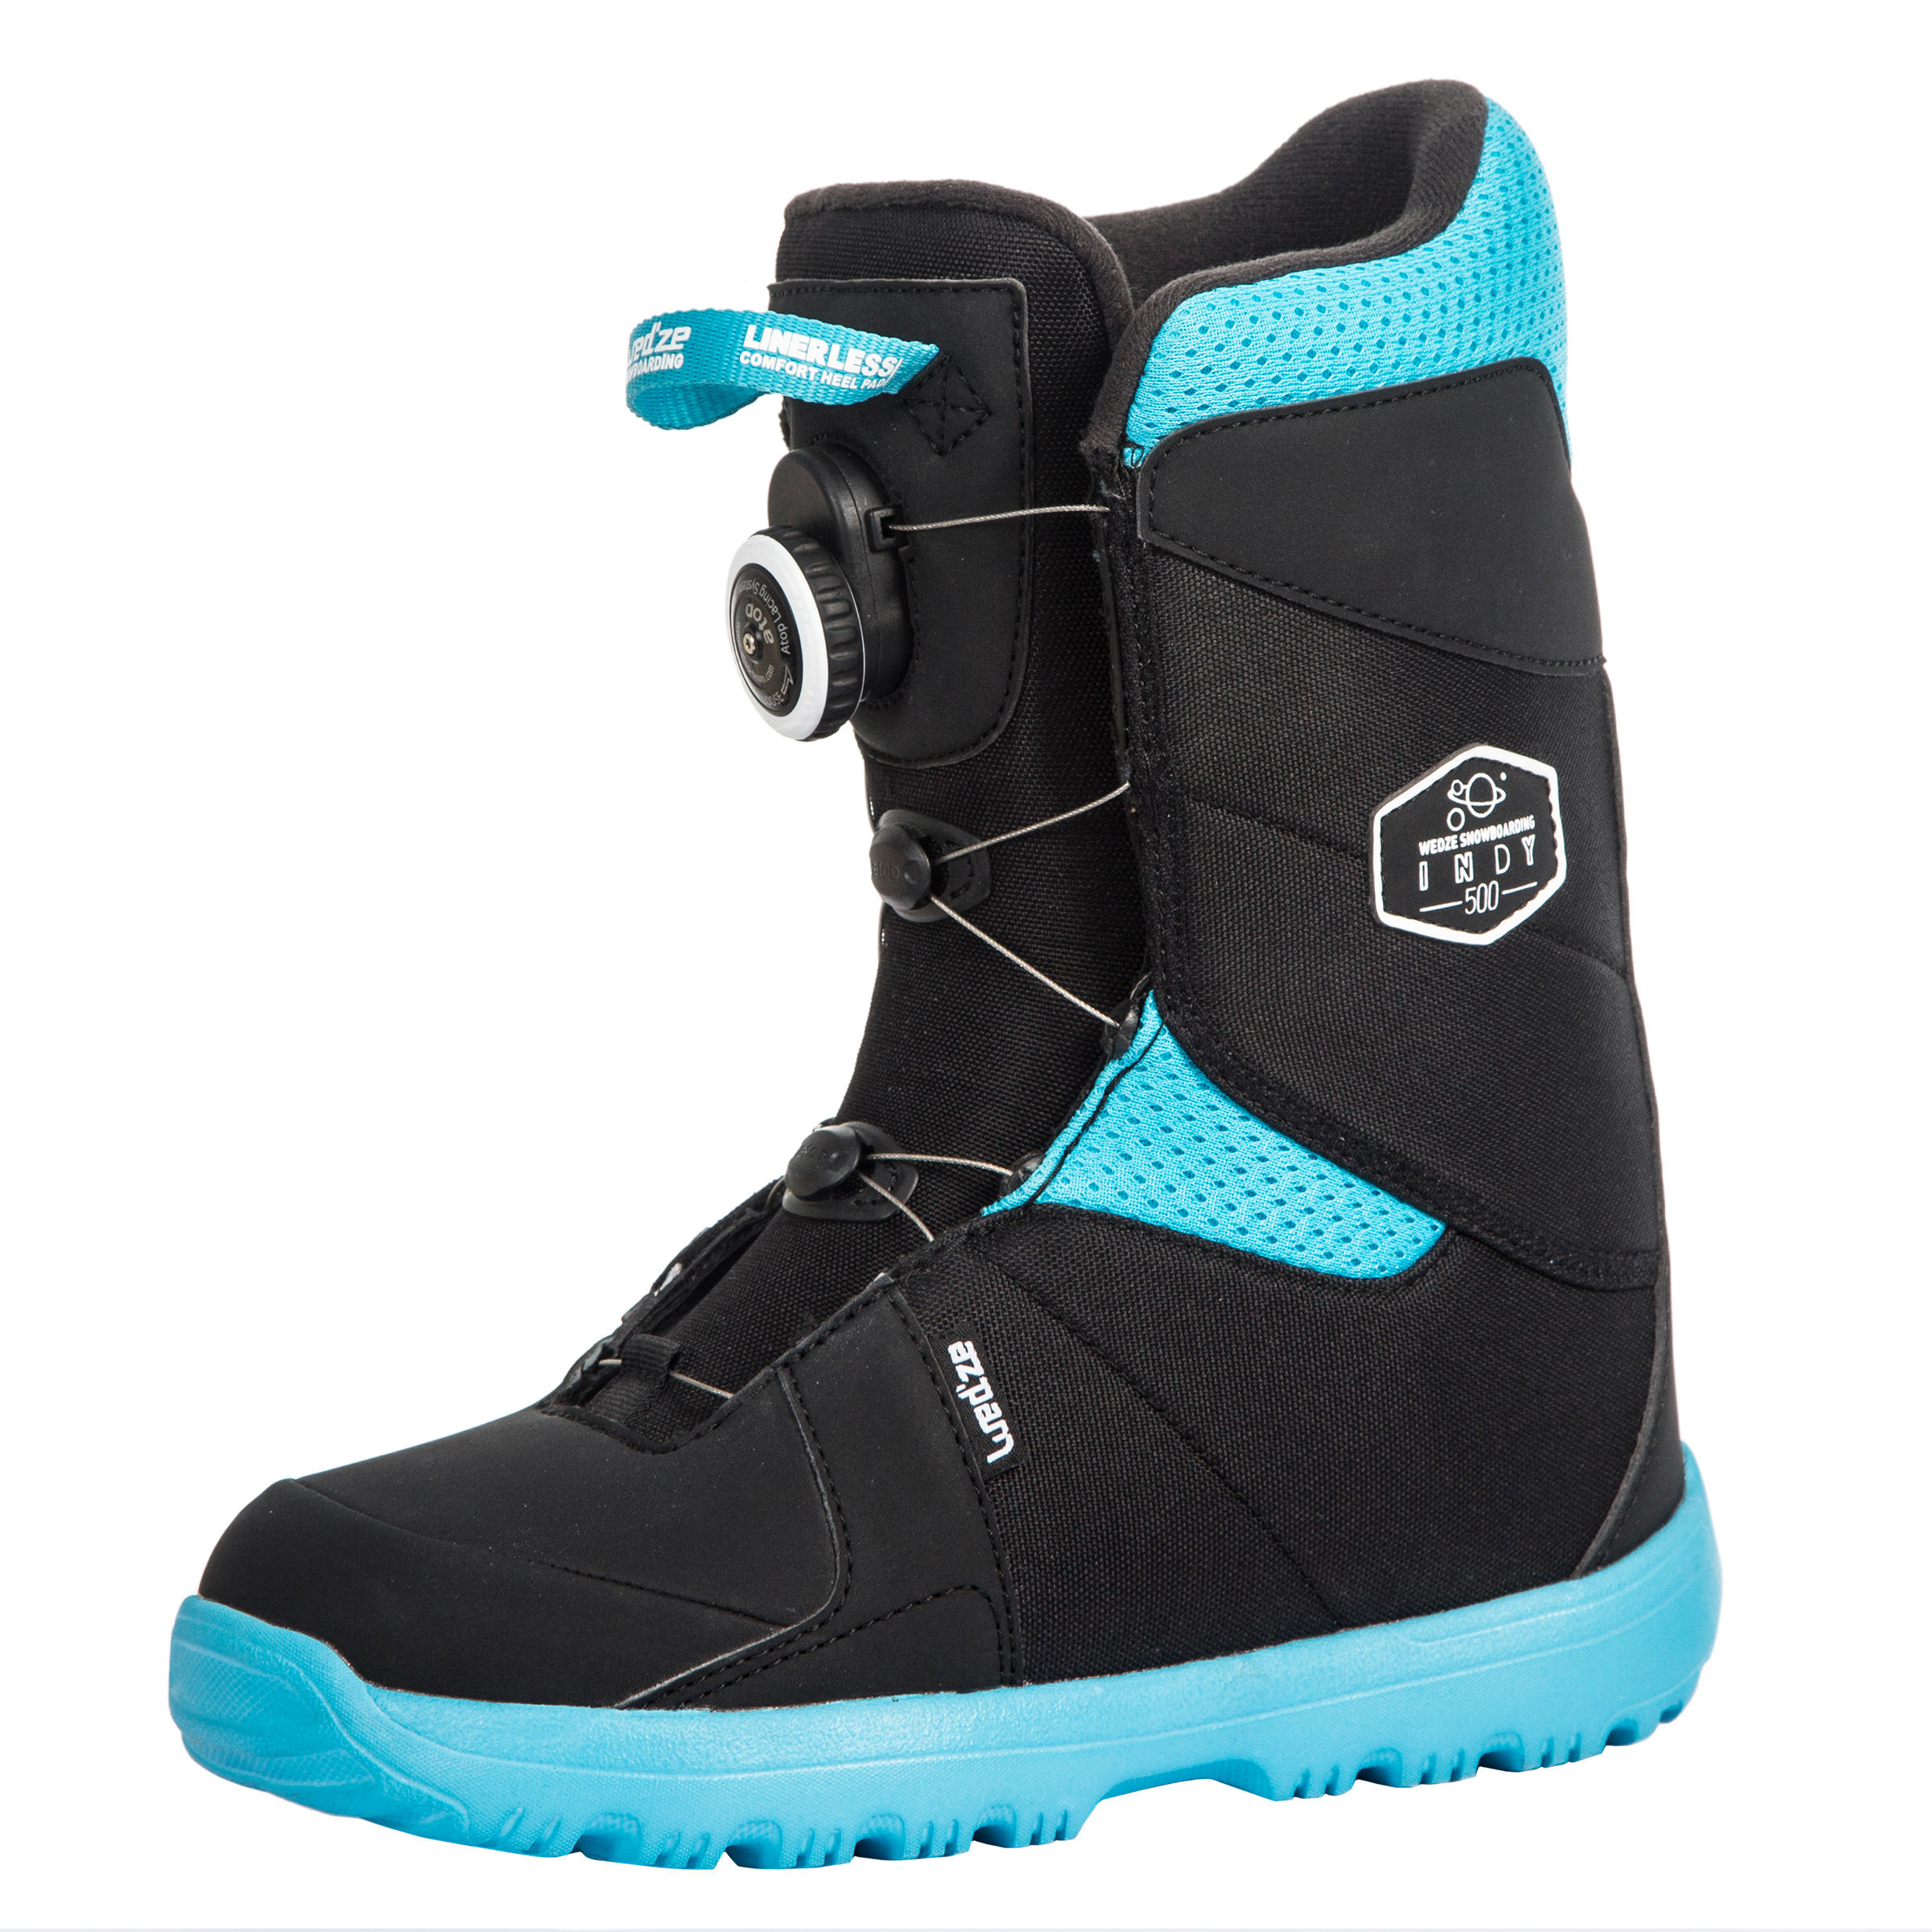 Boots snowboard all mountain/freestyle Indy 500 Copii decathlon.ro imagine 2022